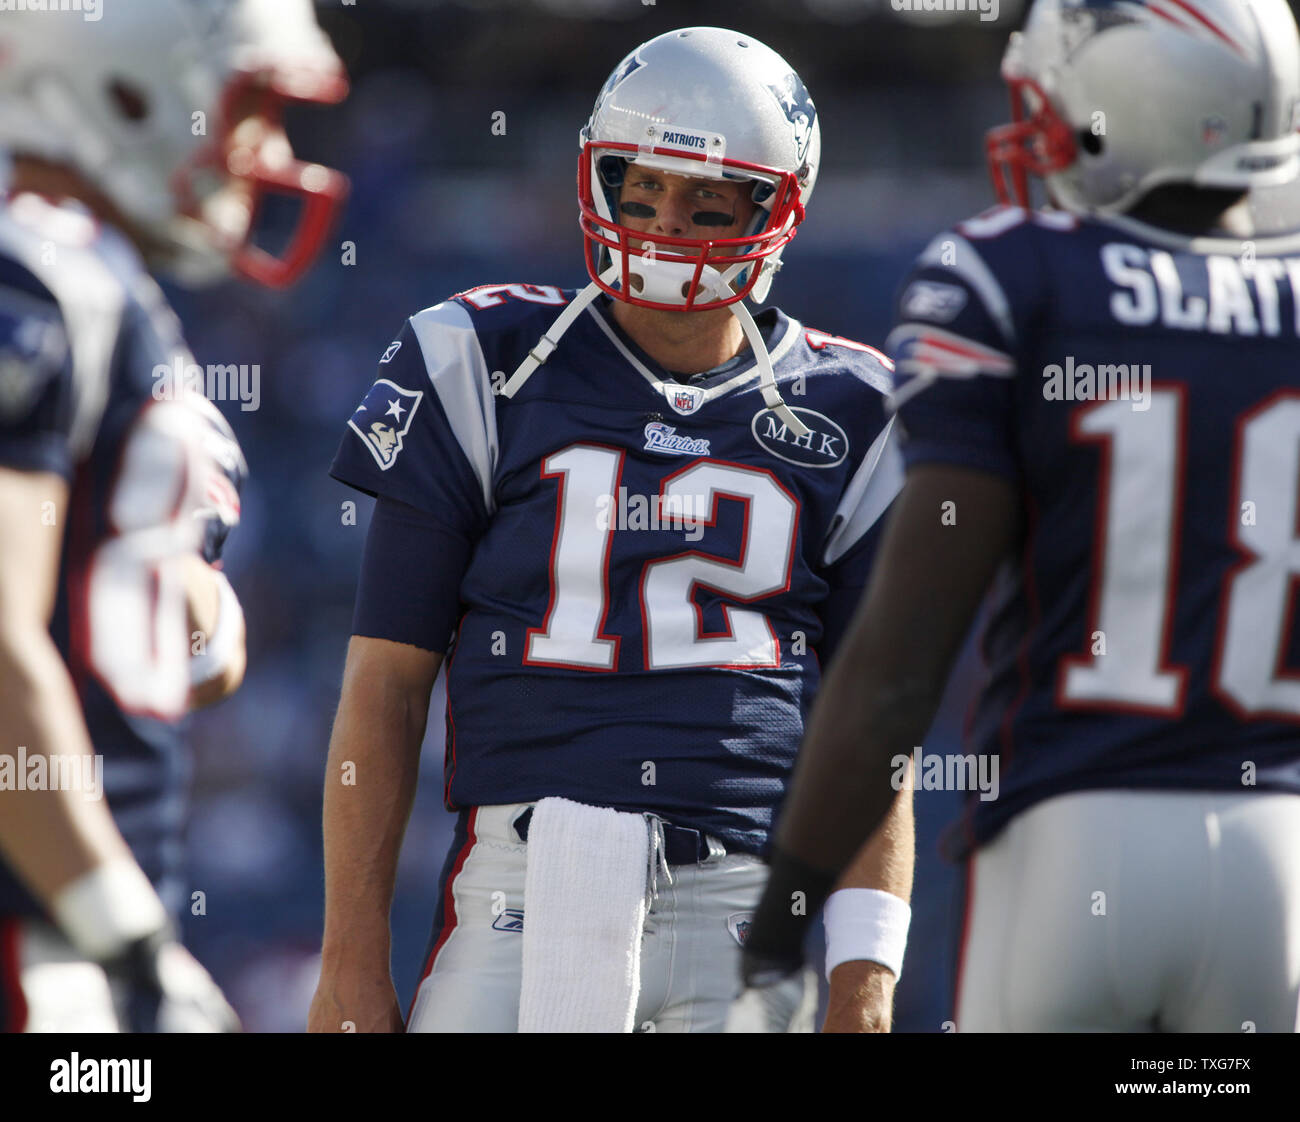 New England Patriots quarterback Tom Brady (12) calls a play to the offense while warming up before the game against the San Diego Chargers at Gillette Stadium in Foxboro, Massachusetts on September 18, 2011.  UPI/Matthew Healey Stock Photo